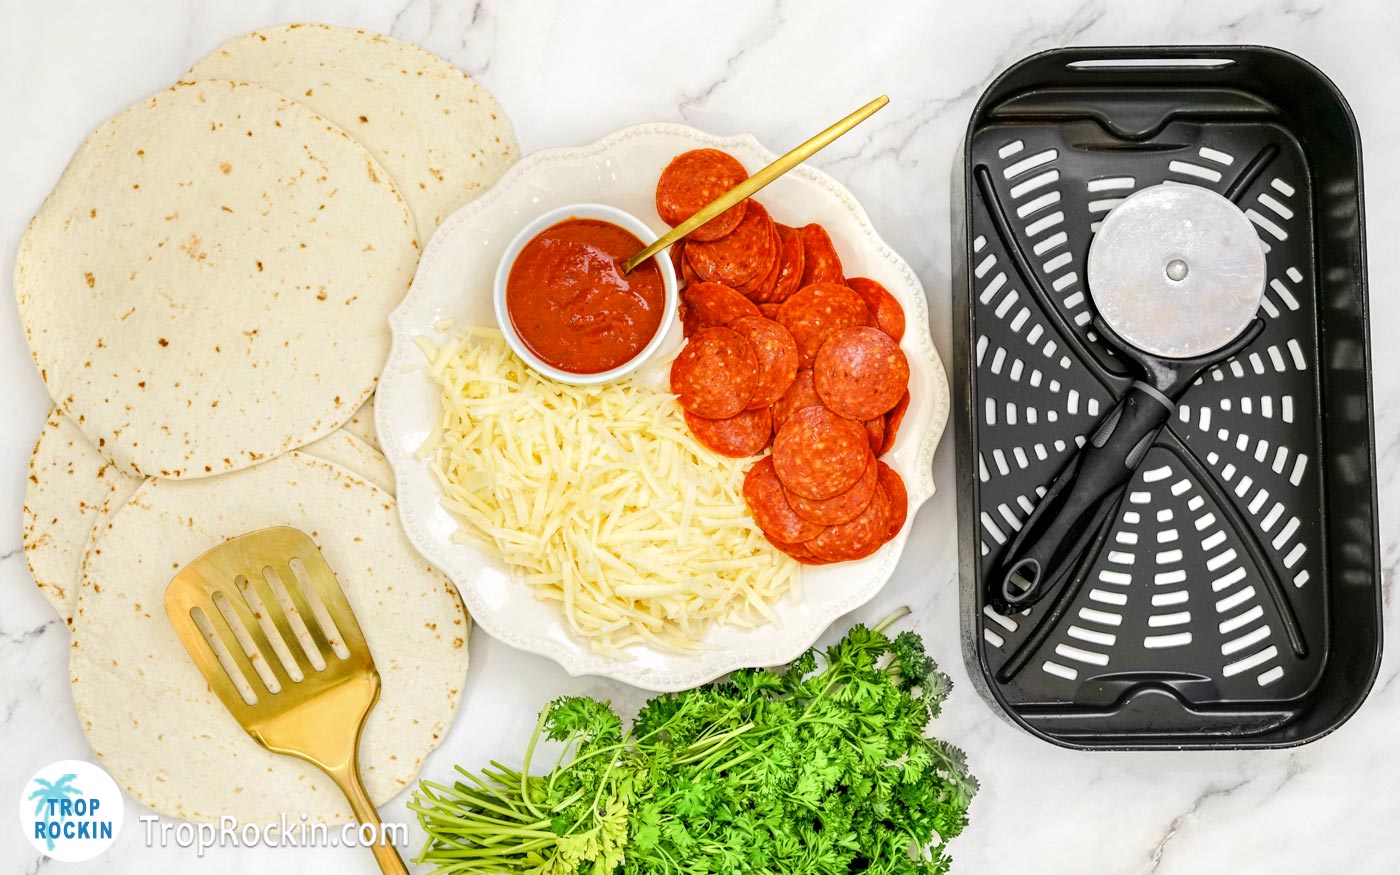 Tortilla pizza ingredients displayed on counter top next to an air fryer basket.